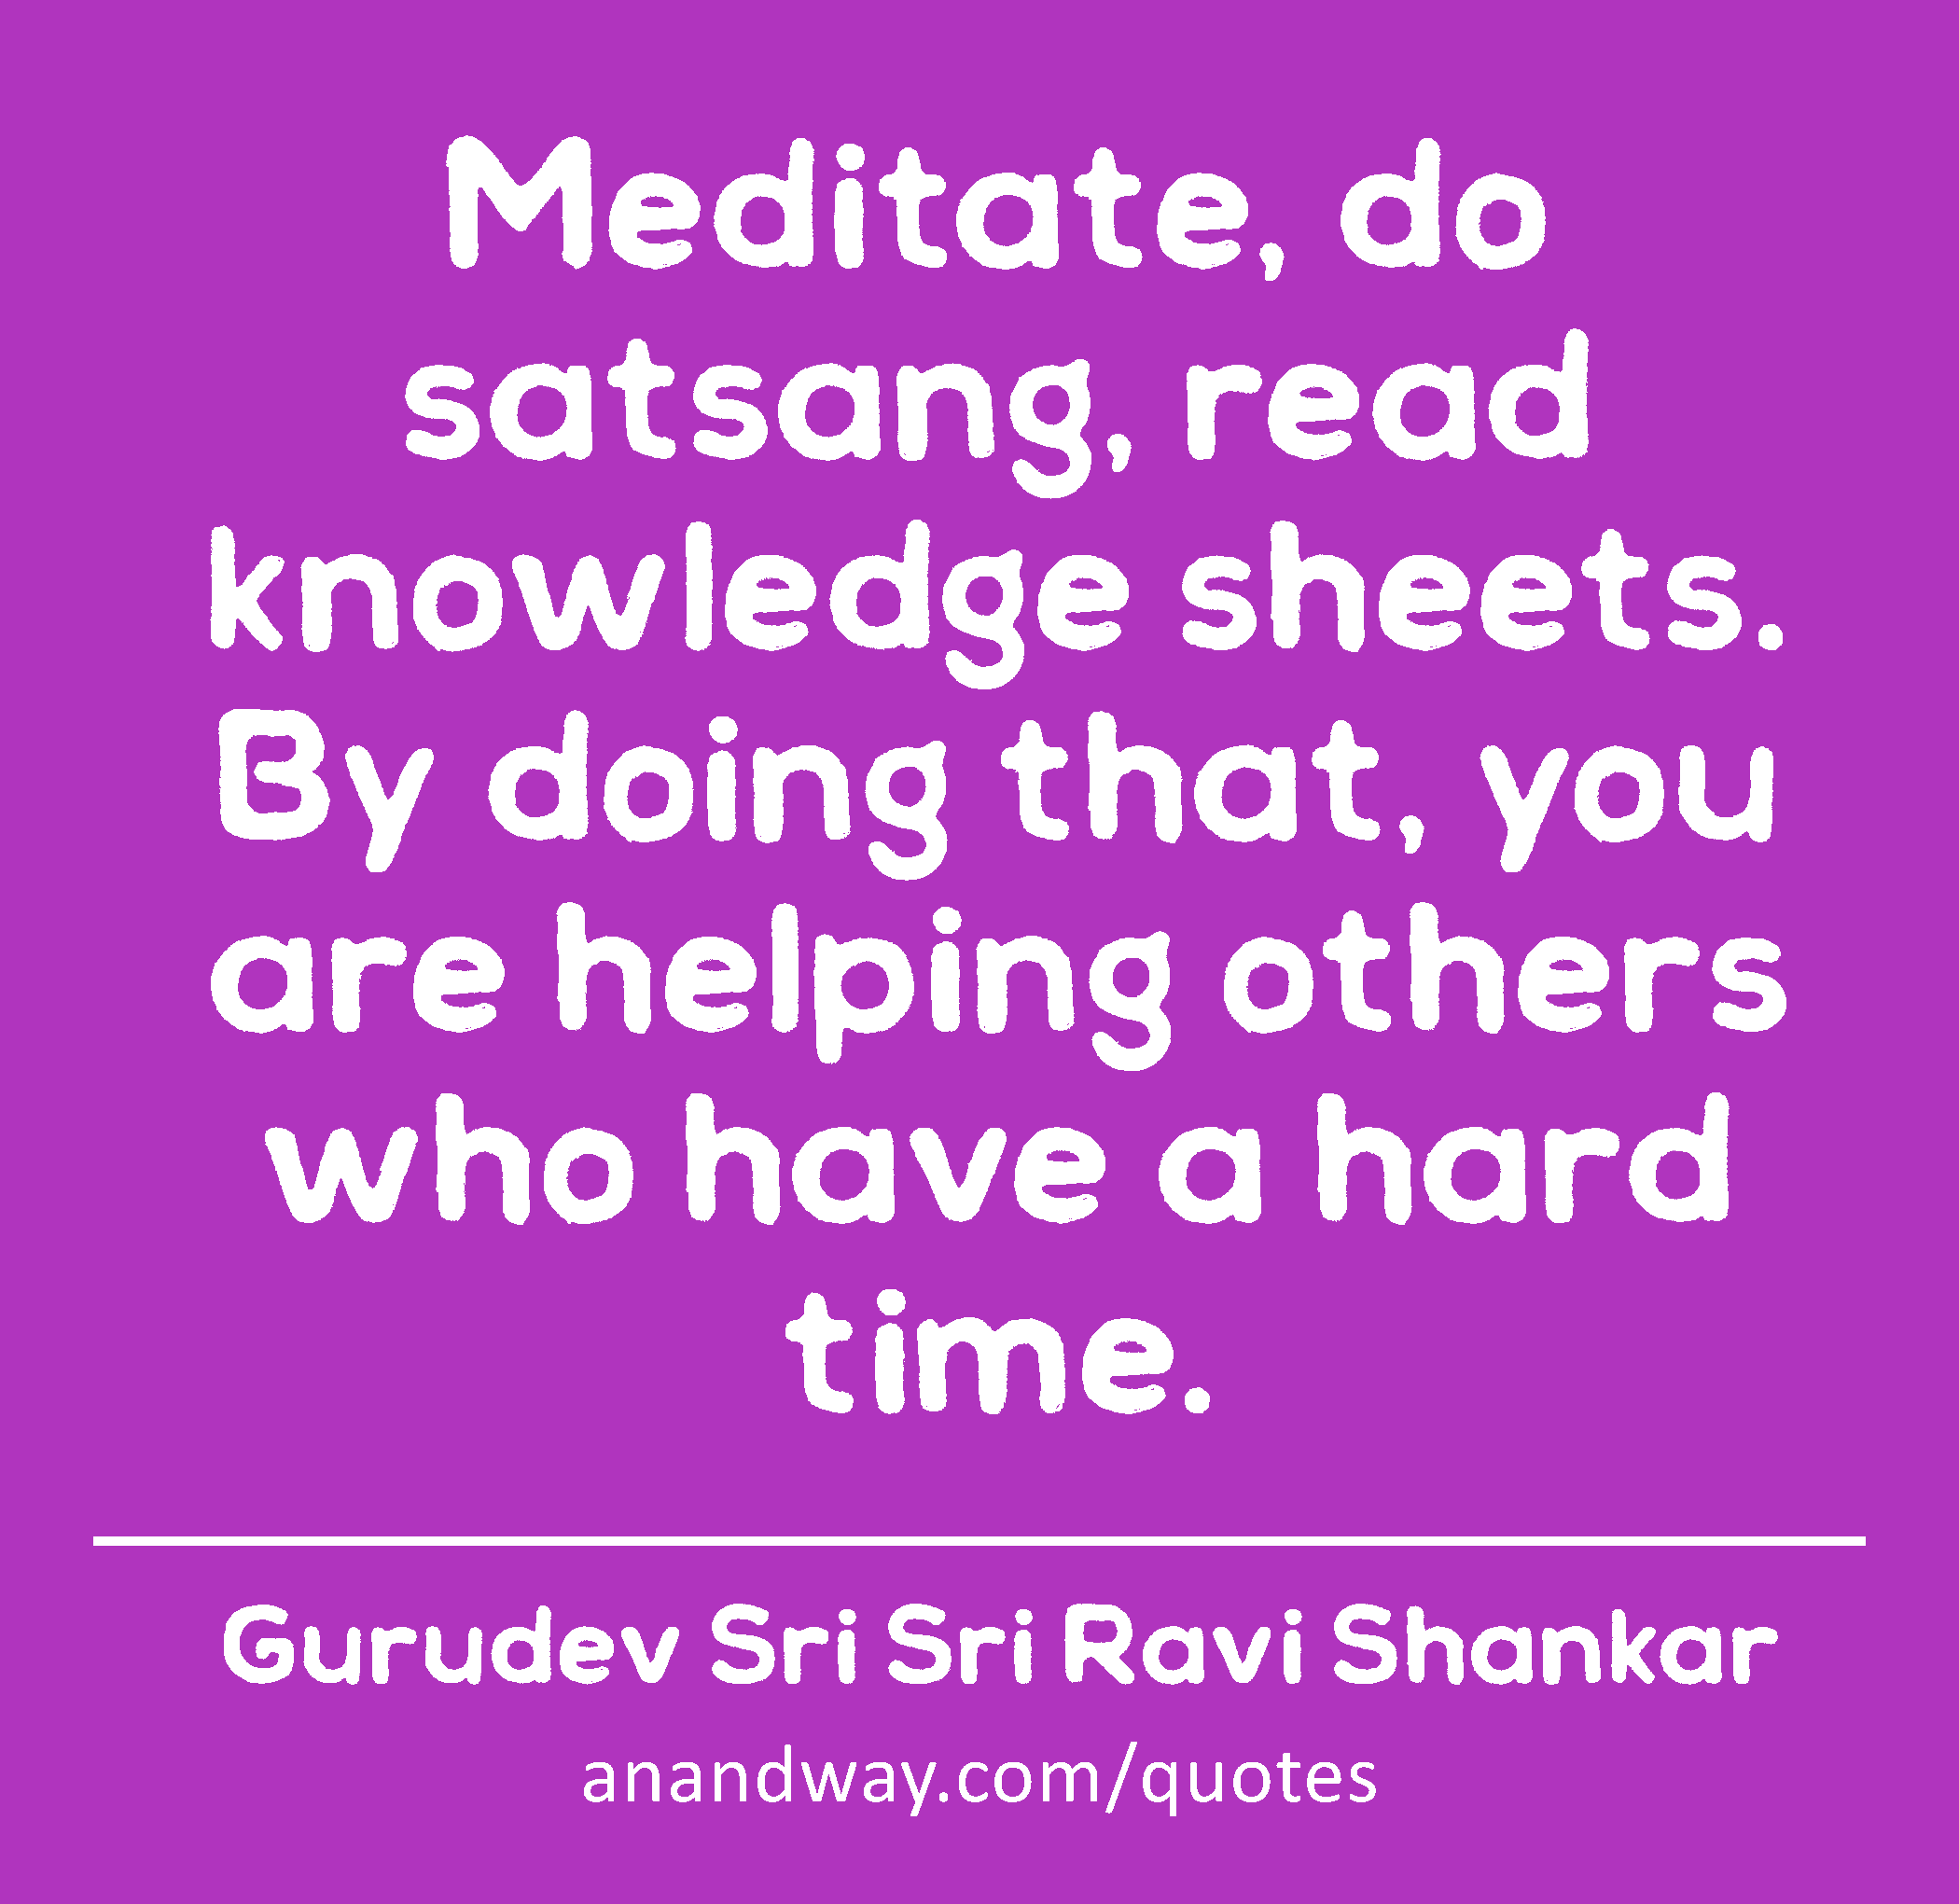 Meditate, do satsang, read knowledge sheets. By doing that, you are helping others who have a hard
 -Gurudev Sri Sri Ravi Shankar